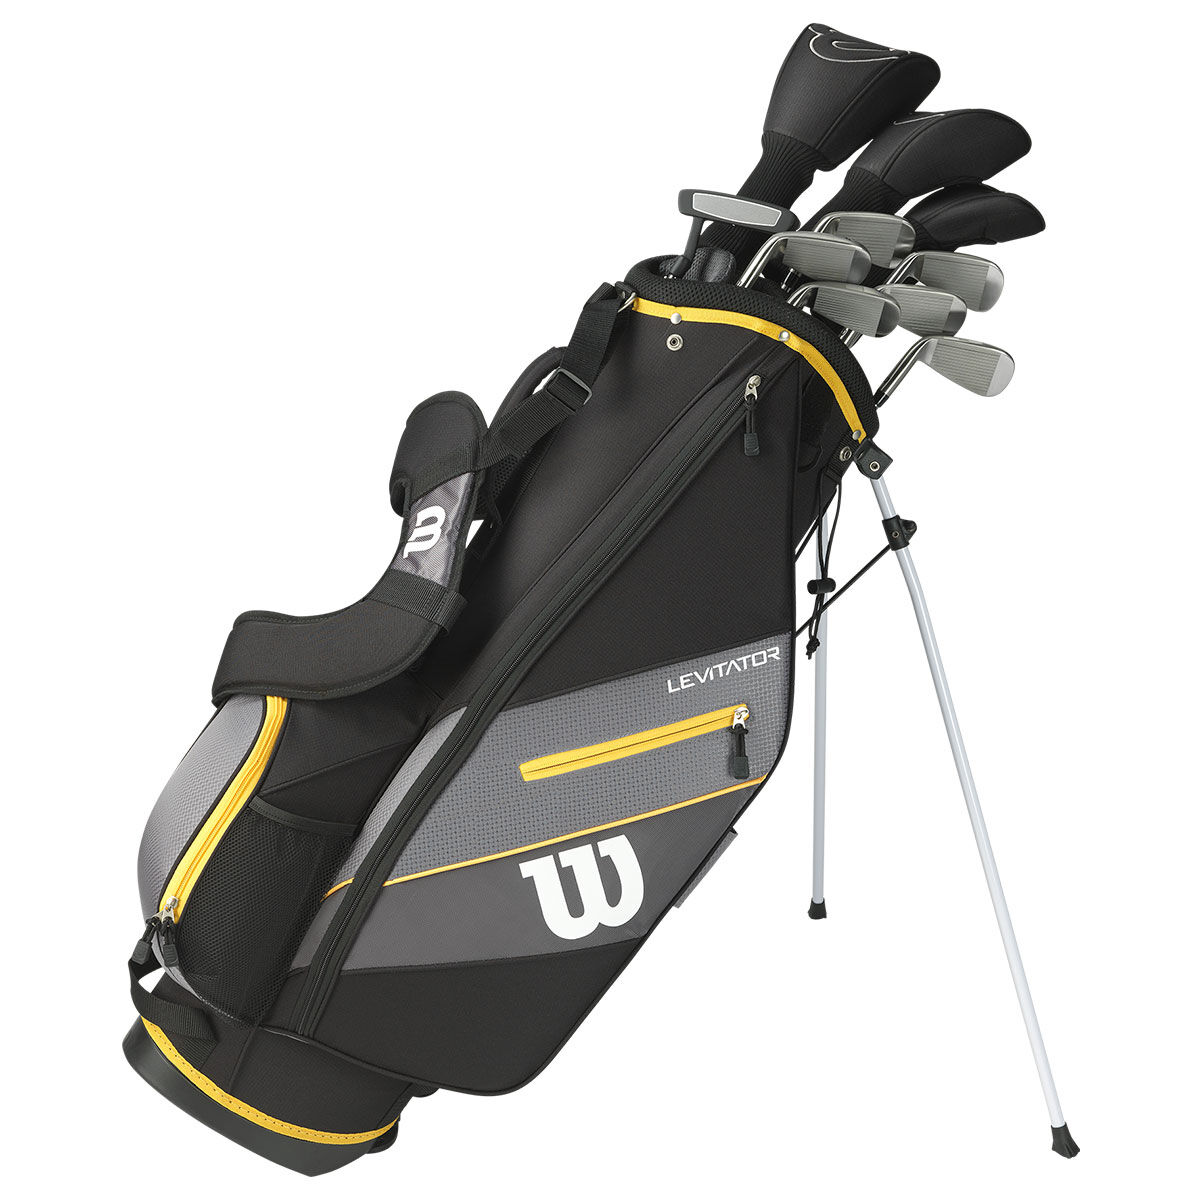 Wilson Ultra XD Graphite Golf Package Set, Mens, Right hand, Black/yellow, One Size | American Golf